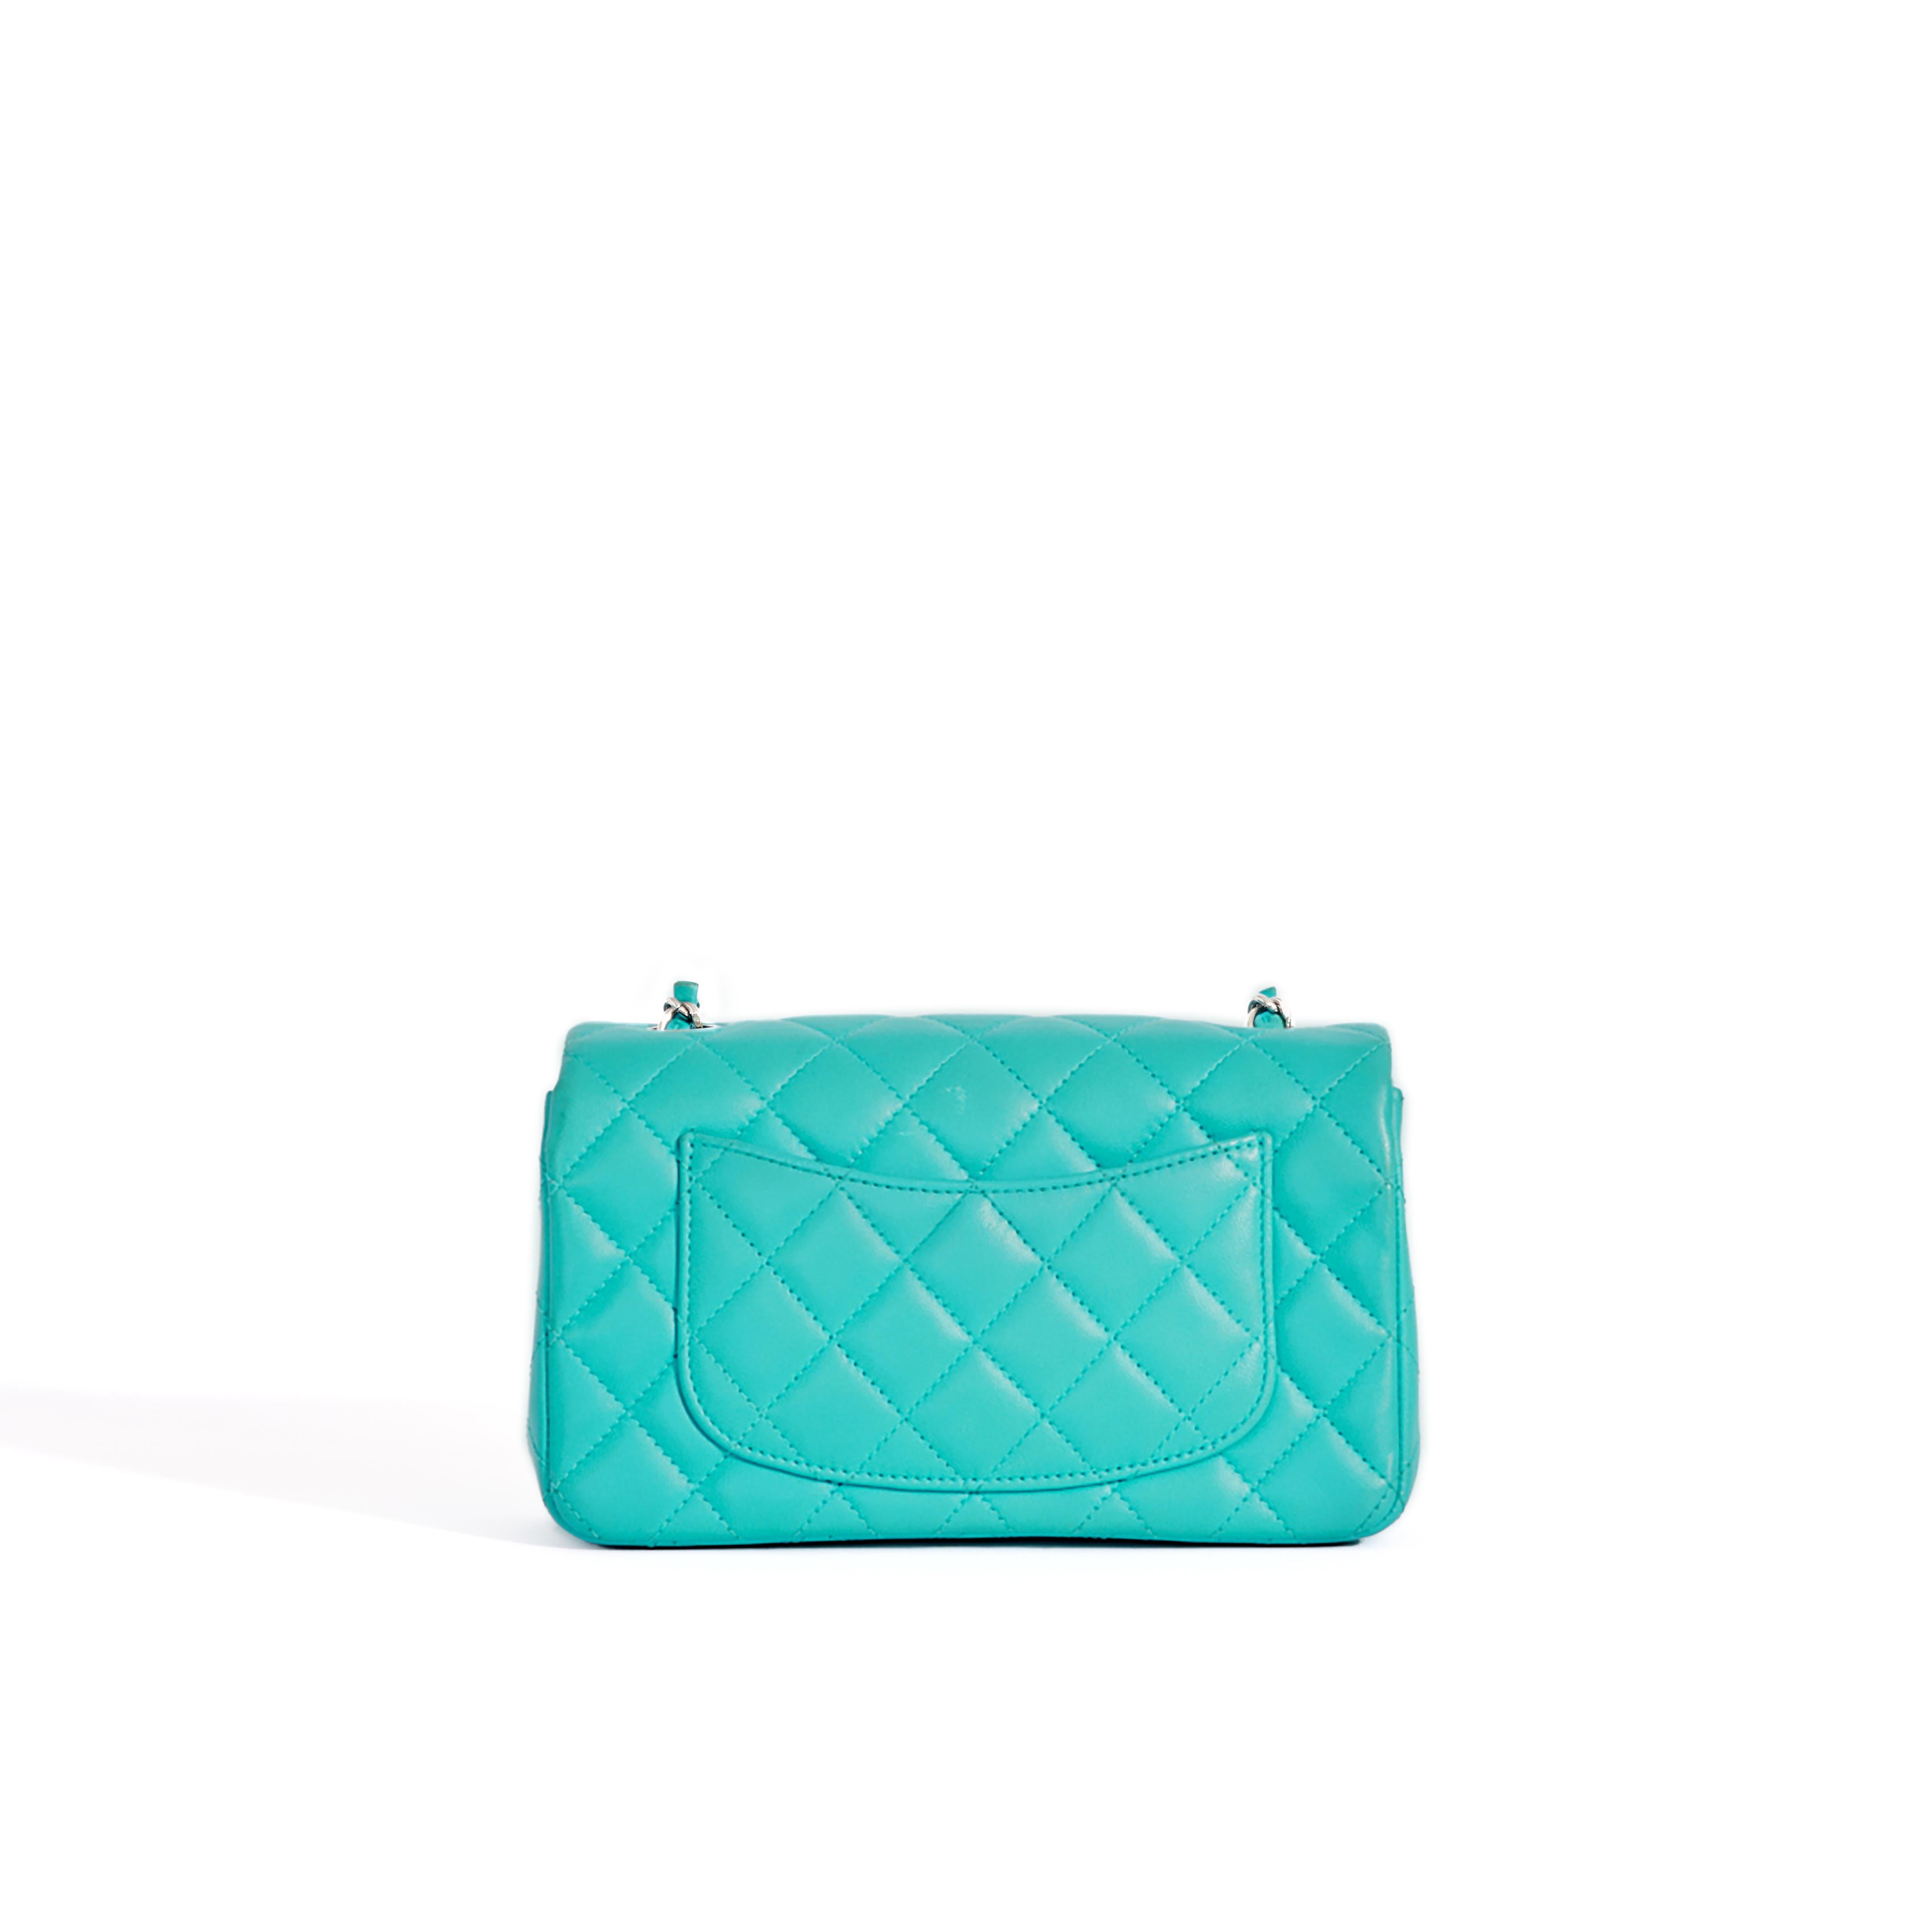 This turquoise quilted lambskin version with signature quilting features a single front flap and the CC logo turn-lock clasp on the front. 

The silver metal hardware includes the famous woven single chain strap which is perfect for wearing as a